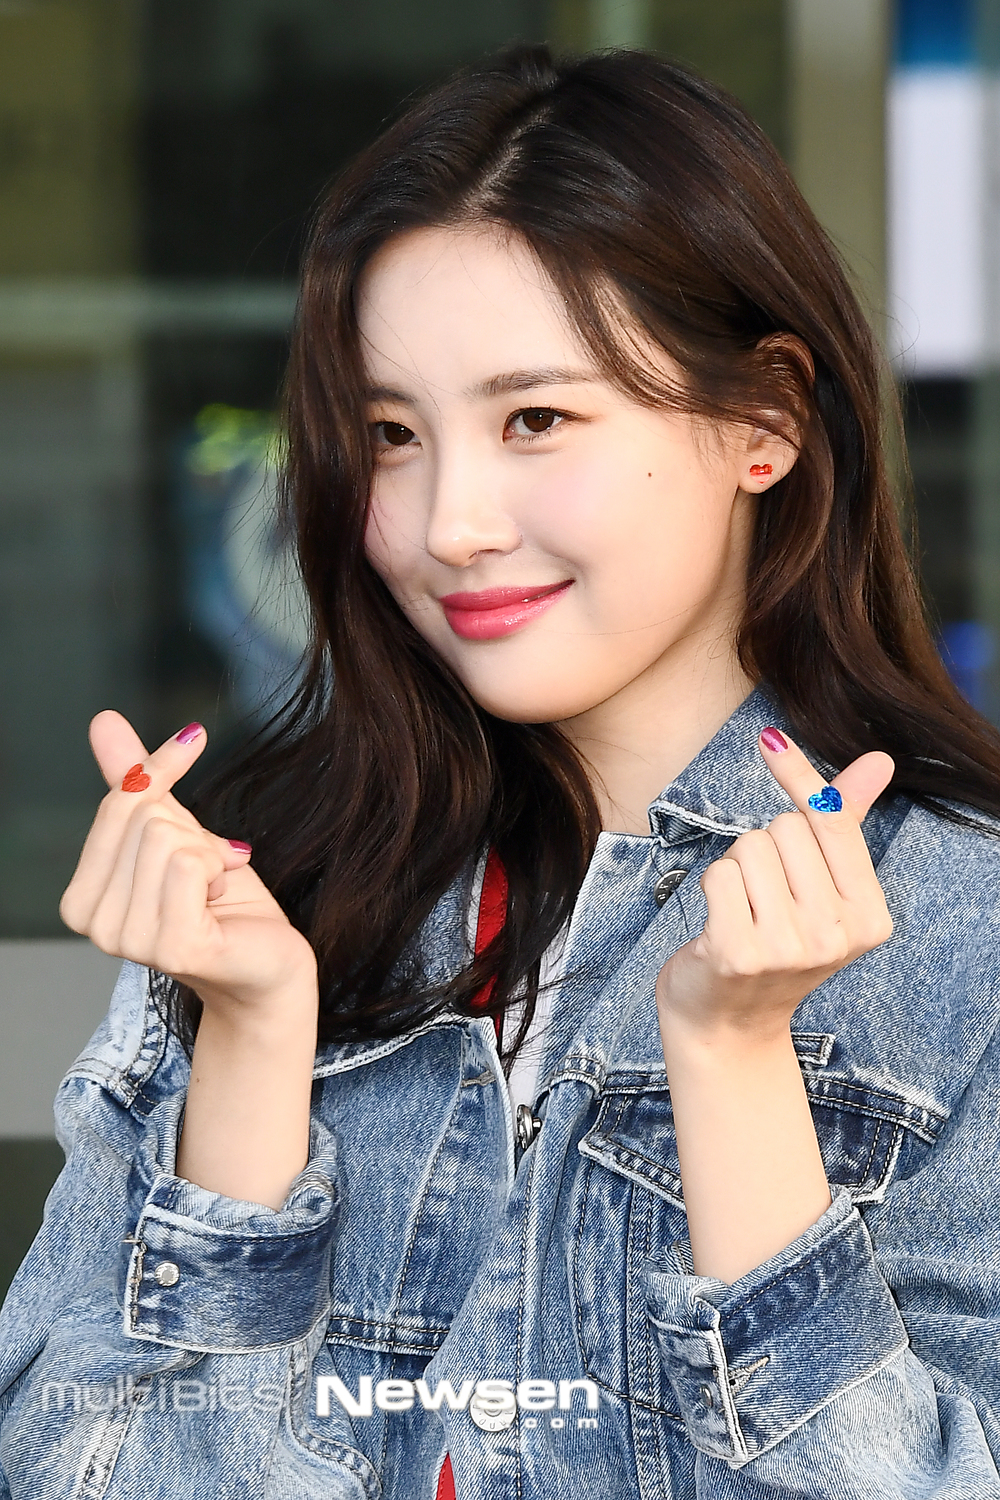 Singer Sunmi left for United States of America San Francisco on March 4 at the Incheon International Airport in Unseo-dong, Jung-gu, Incheon, on the afternoon of March 4 to attend the 2019 Sunmi THE 1ST WORLD TOUR [WARNING] tour schedule.Singer Sunmi is leaving for United States of America San Francisco with an airport fashion show.exponential earthquake